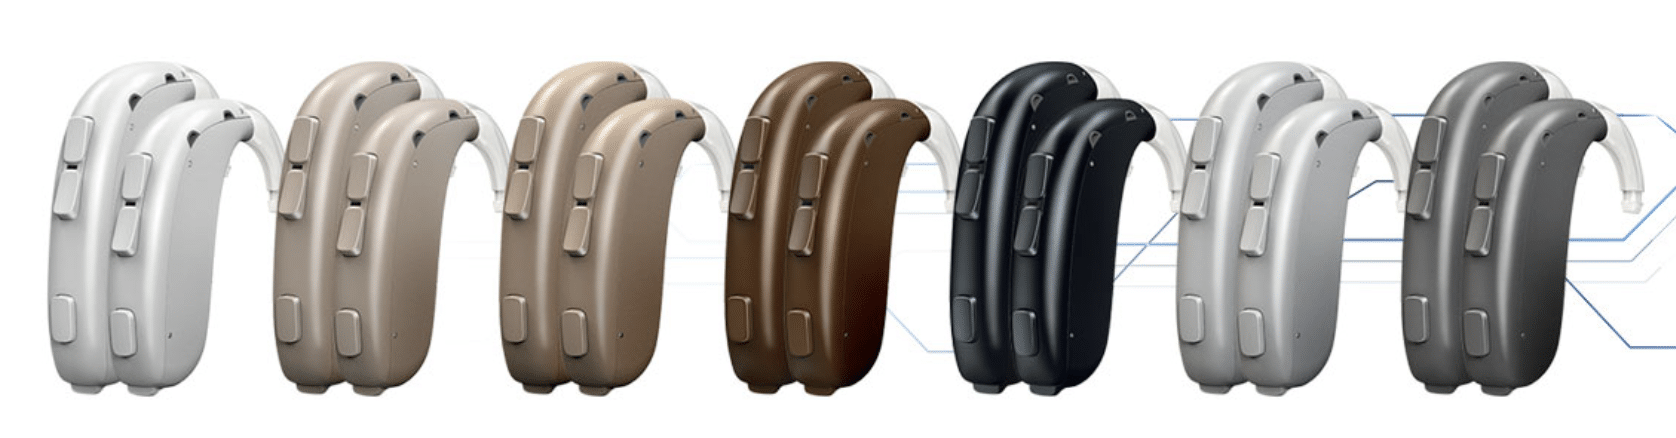 The seven colors of Oticon Xceed hearing aids